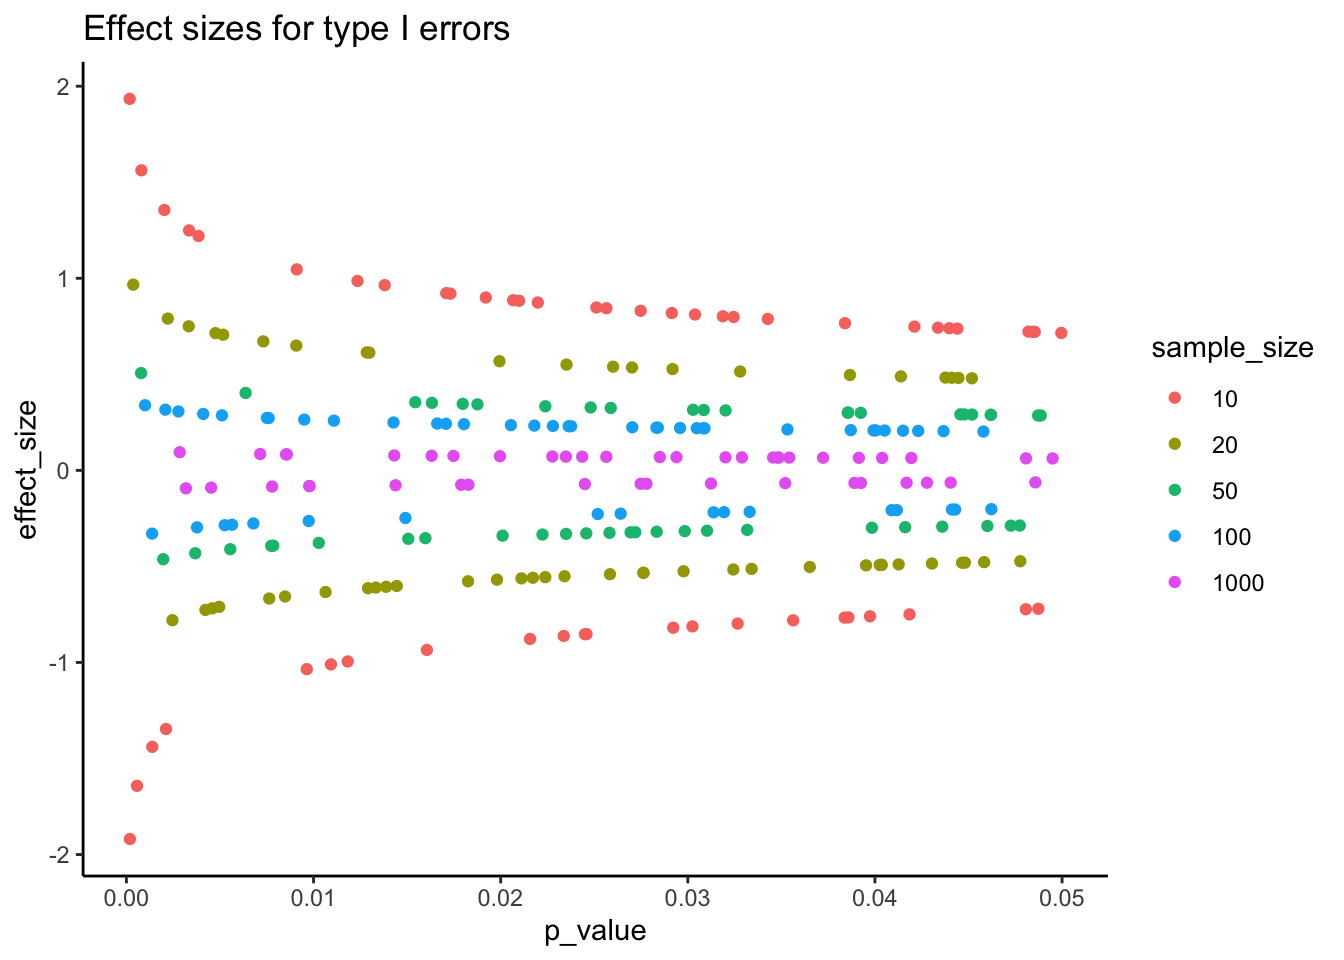 Effect size as a function of p-values for type 1 Errors under the null, for a paired samples t-test.